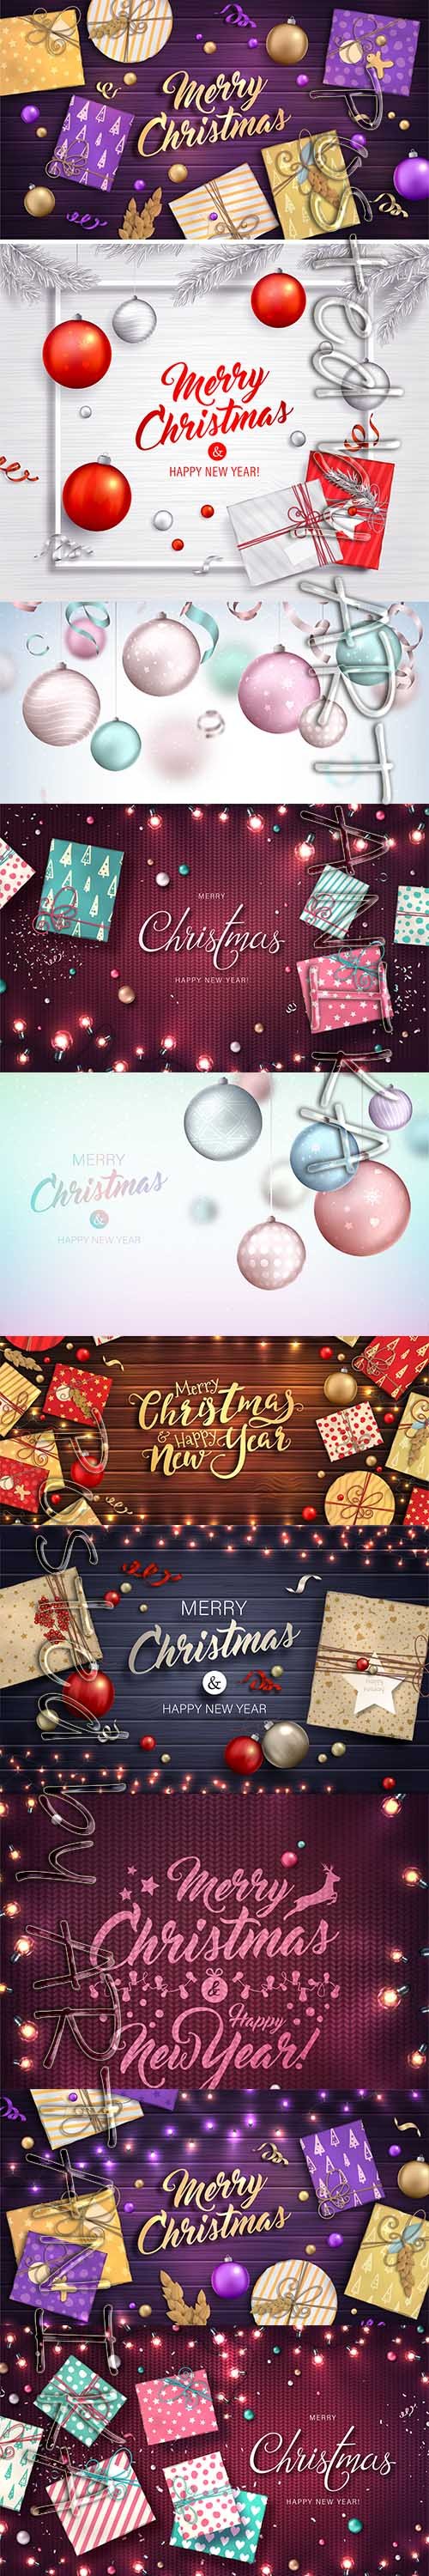 Merry Christmas and New Year 2020 Vector Illustrations Pack Vol 18